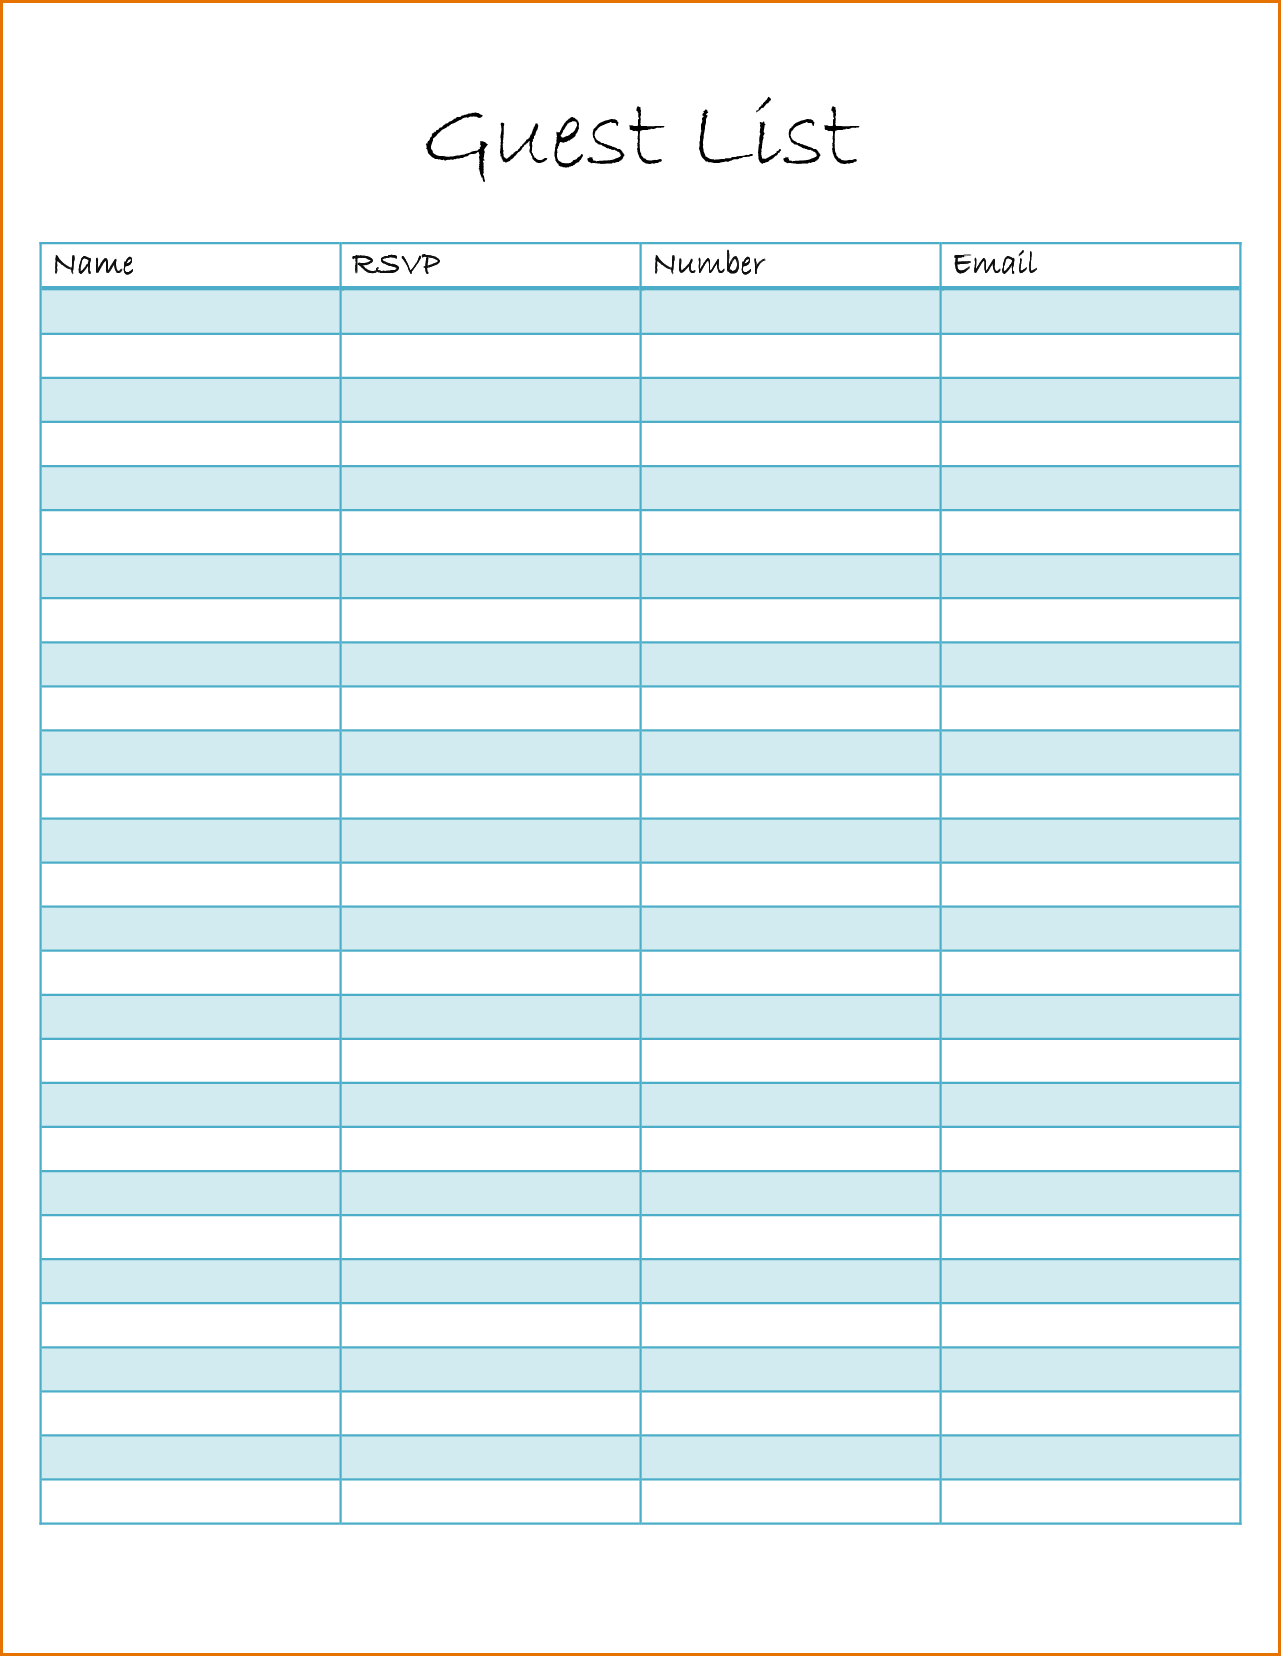 Wedding Guest List Template Printable from uroomsurf.com